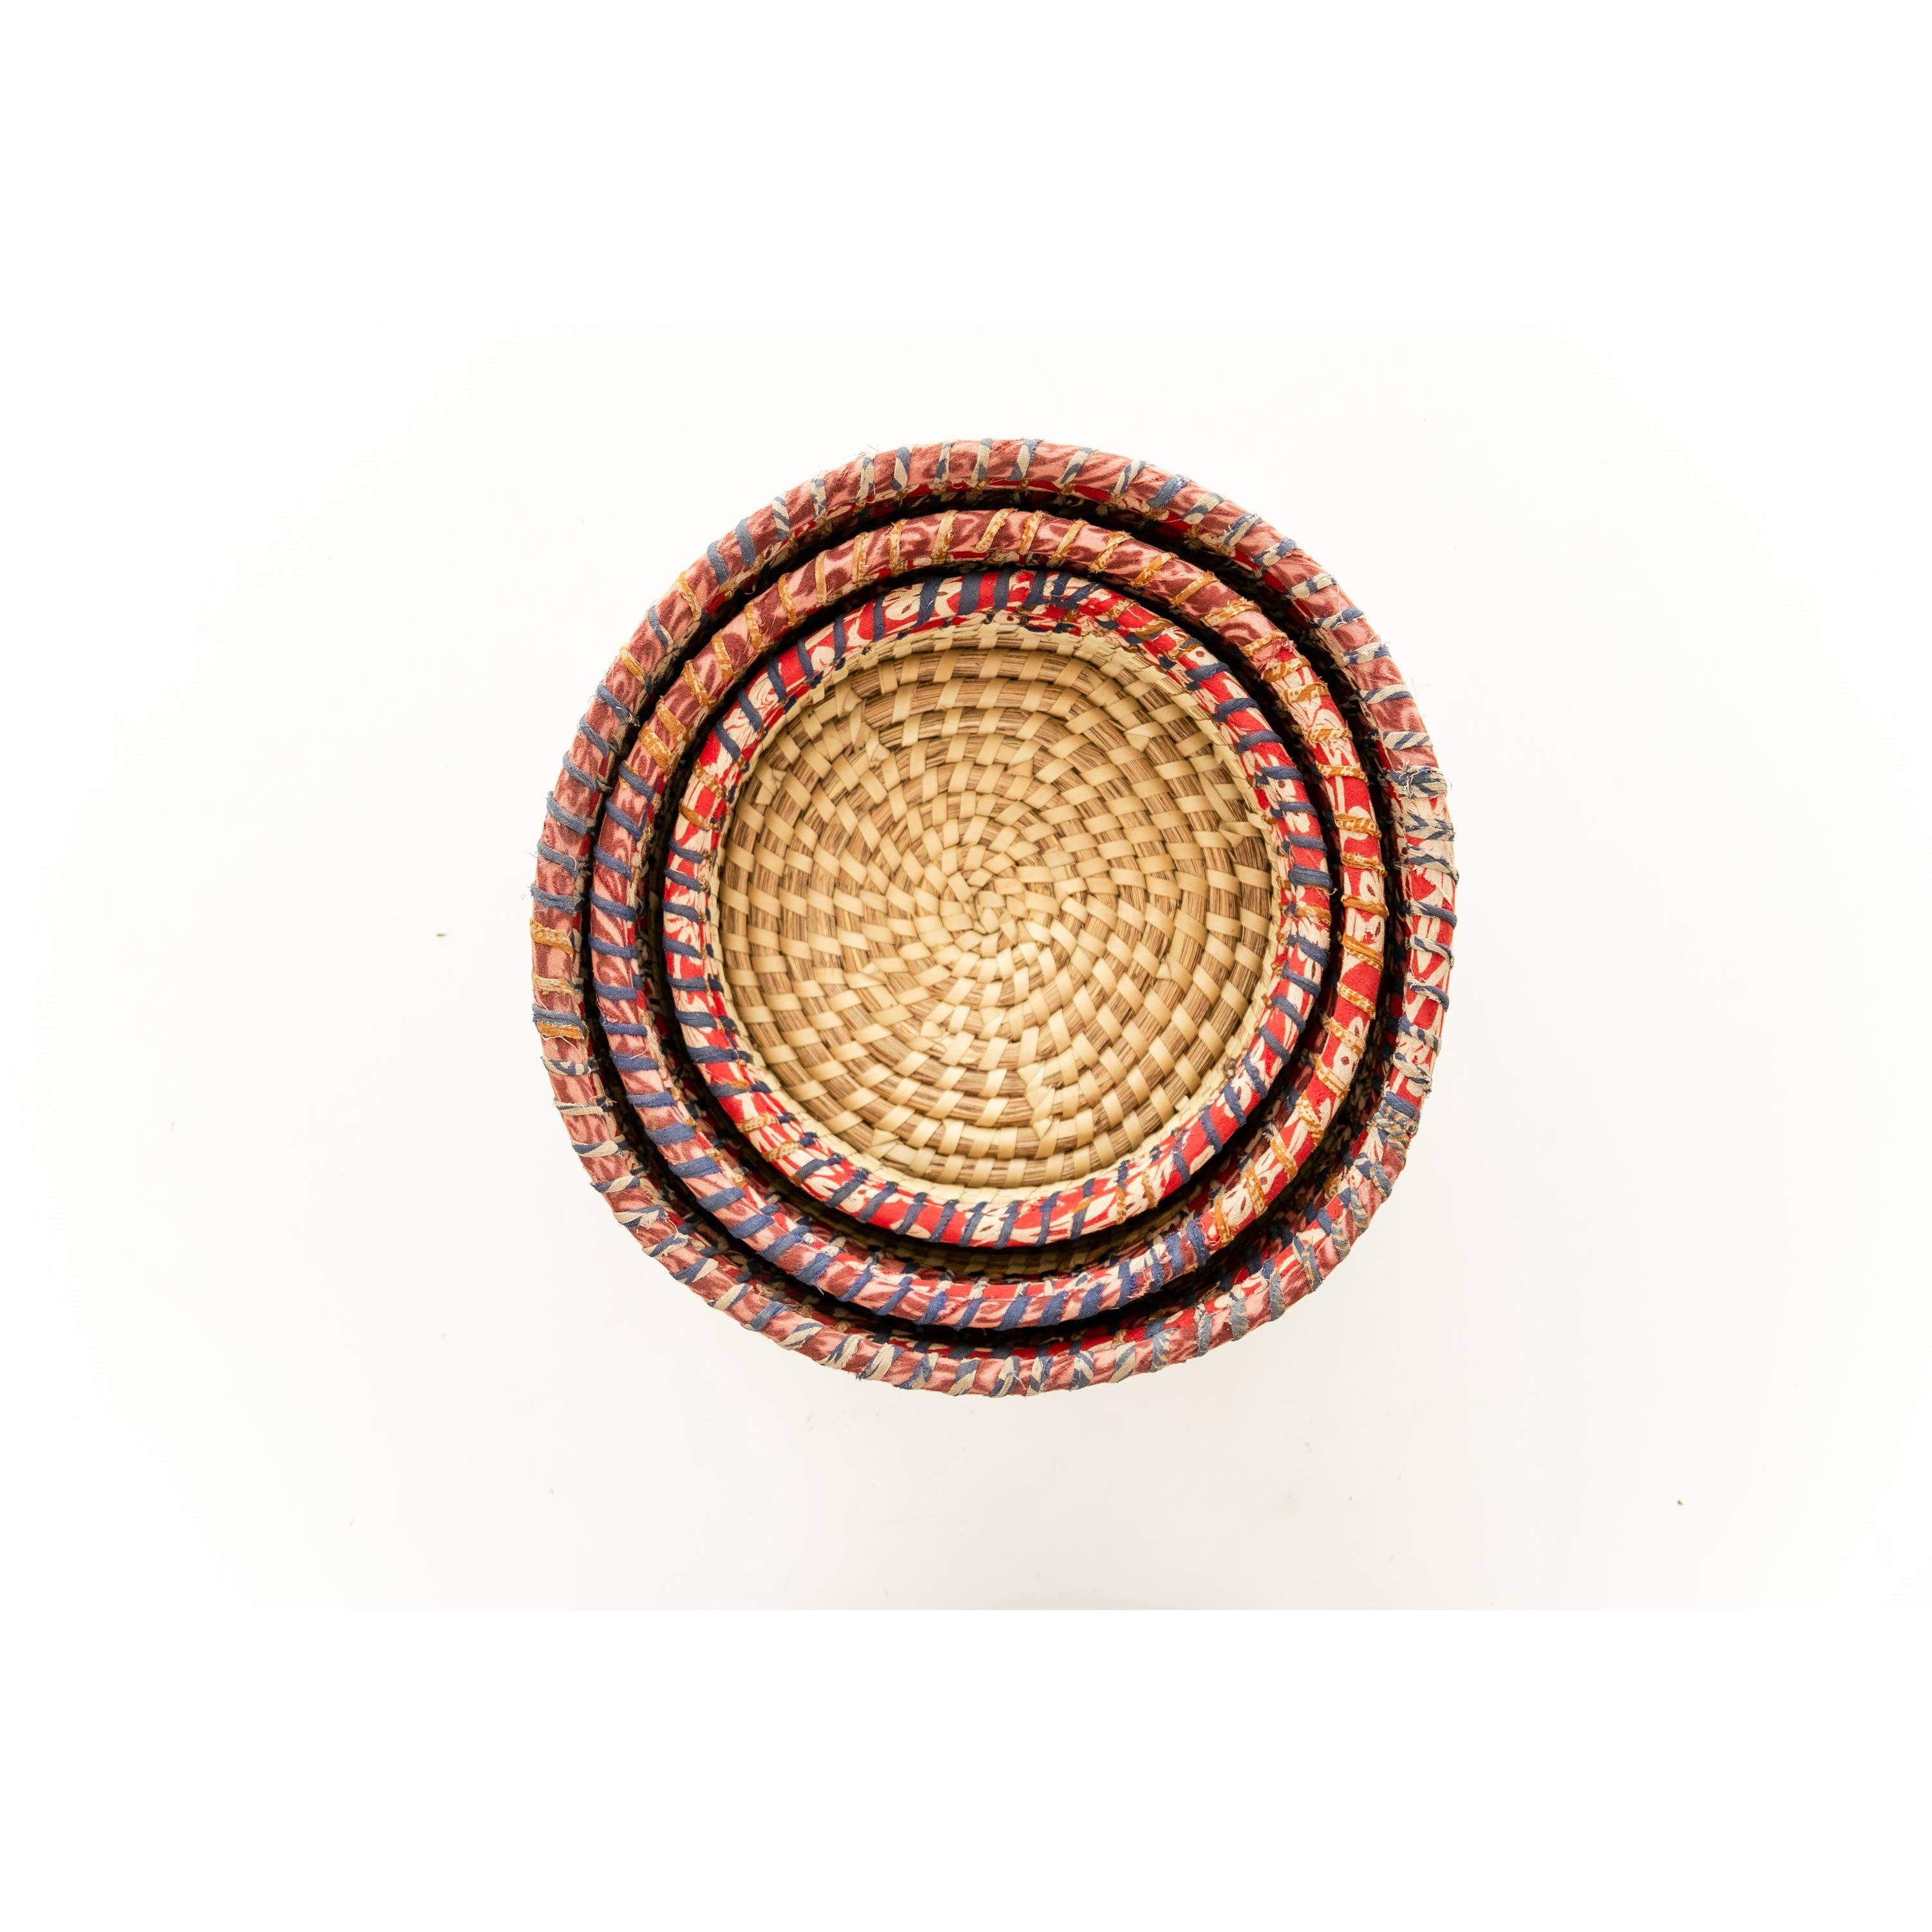 Round Cascades Basket Medium - - Assorted Colors/Patterns (*Local Pickup/Local Delivery Only)